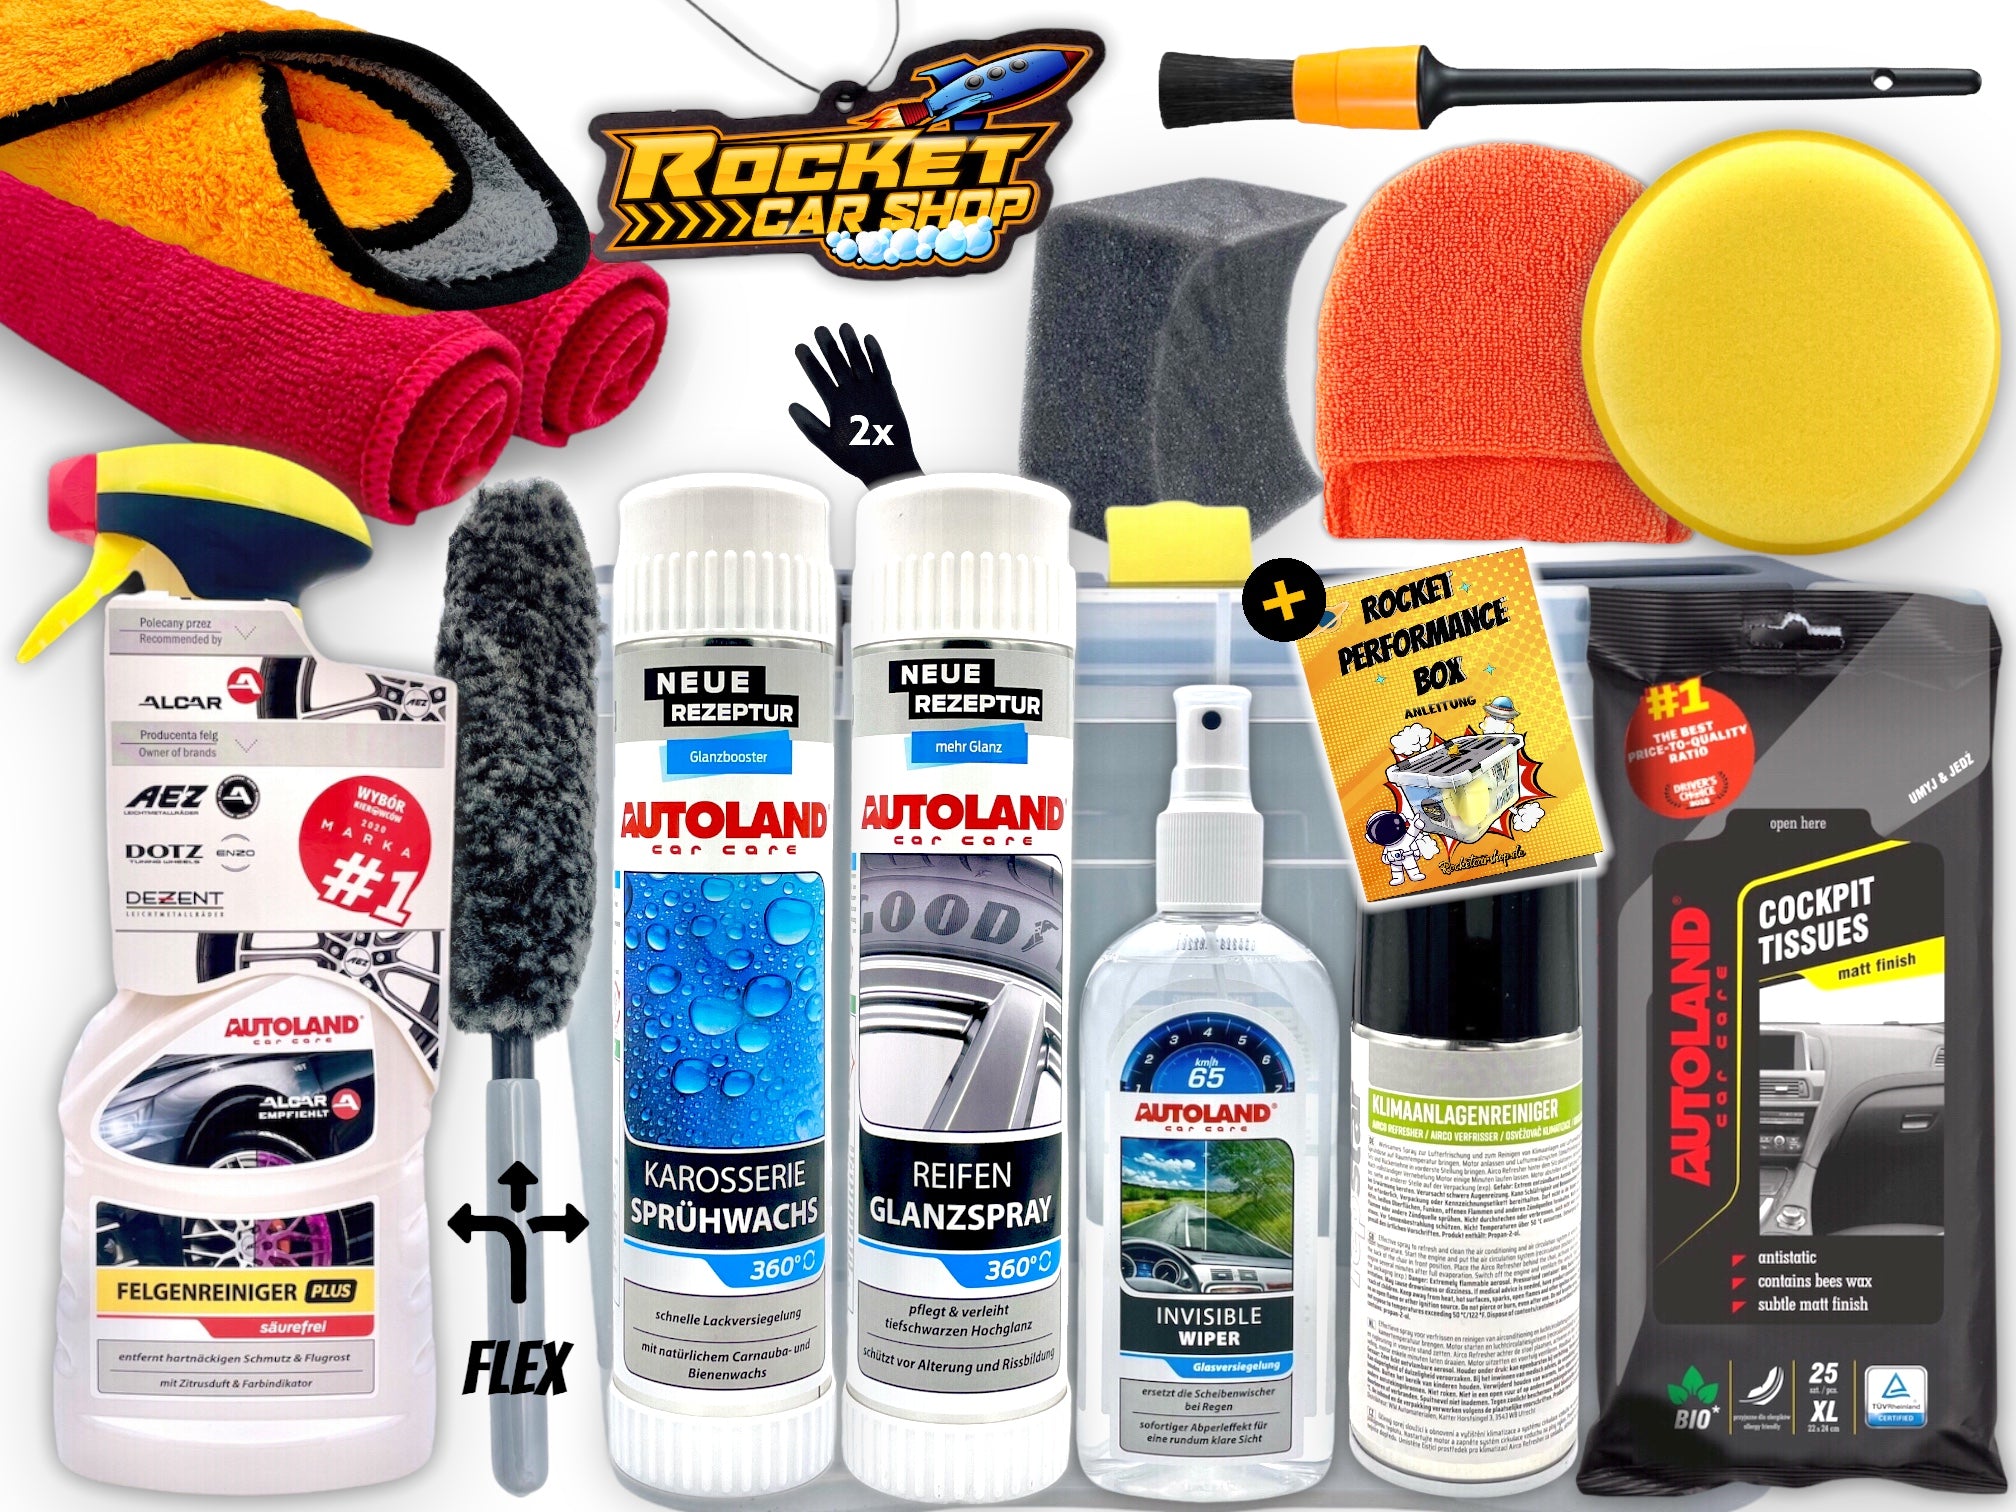 Car Care Set: All-in-One 17-piece Rocket Performance Box